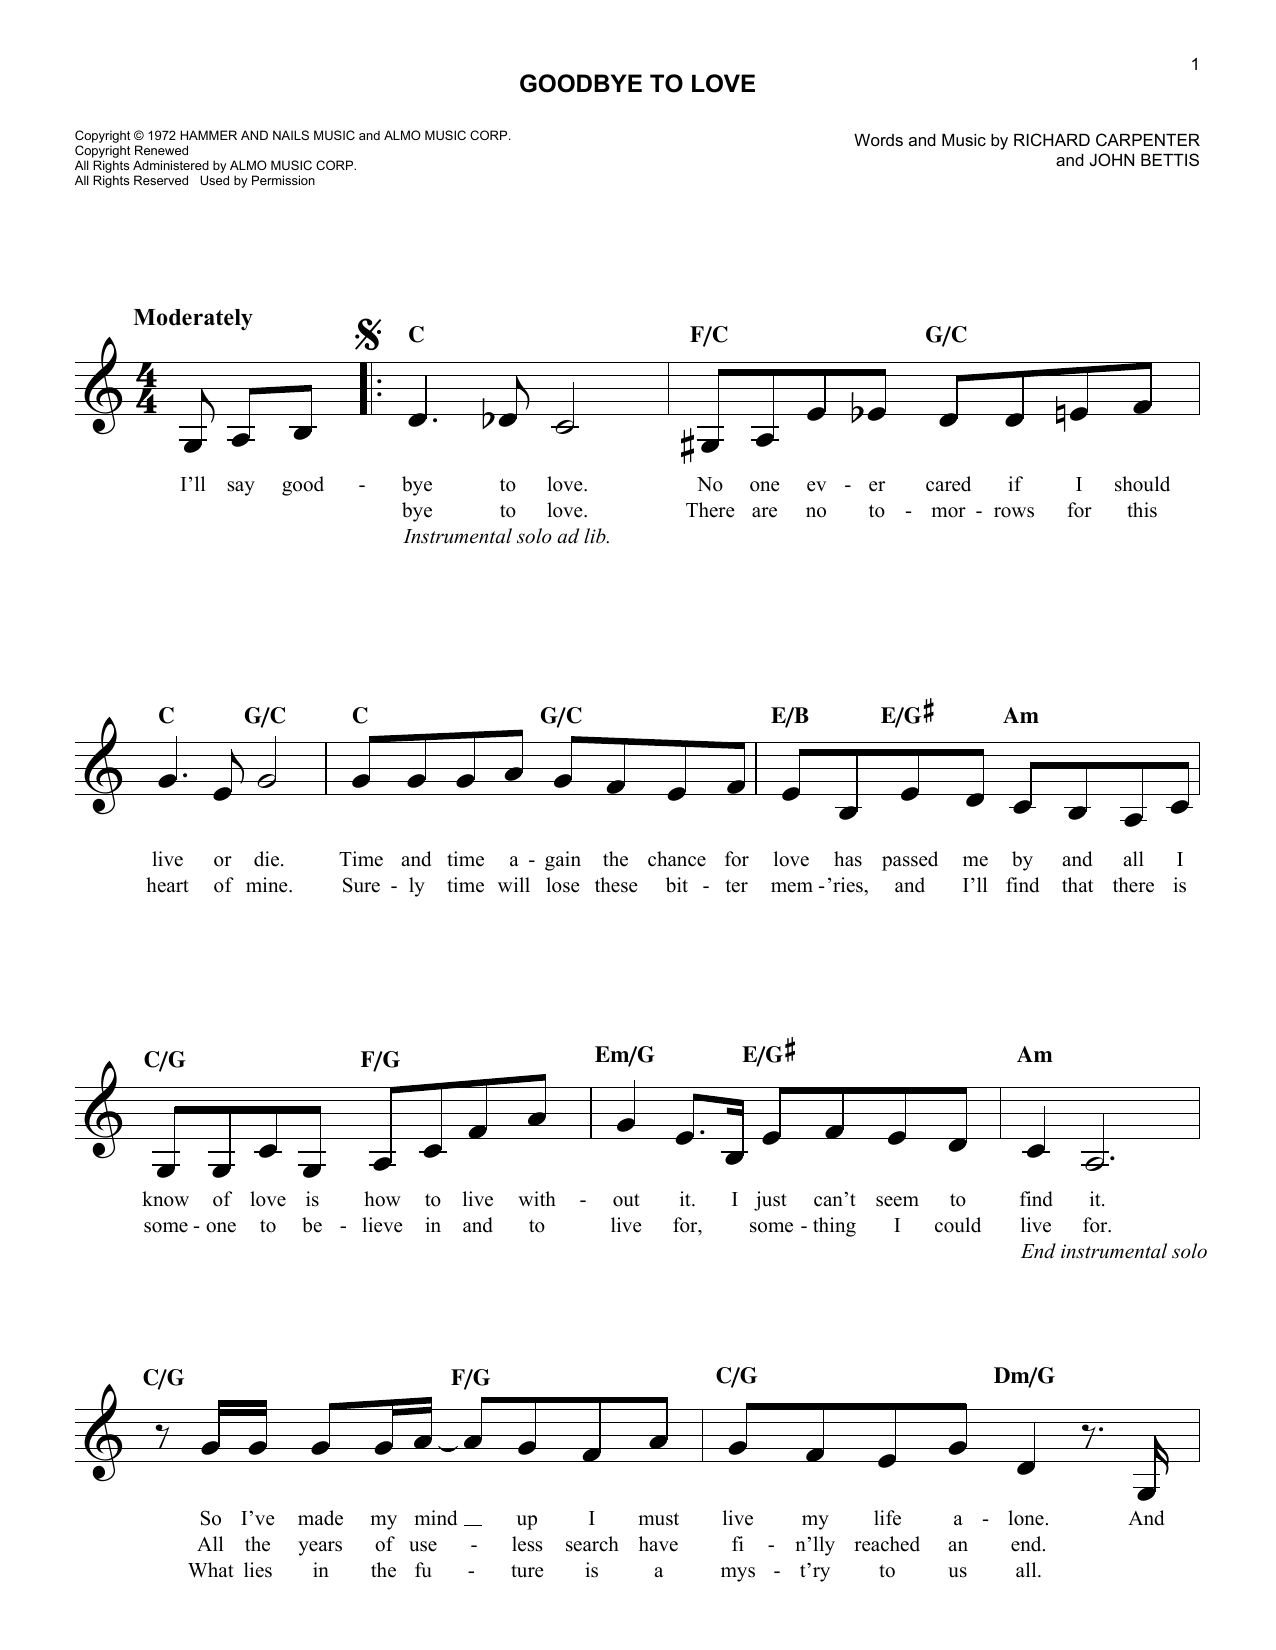 Download The Carpenters Goodbye To Love Sheet Music